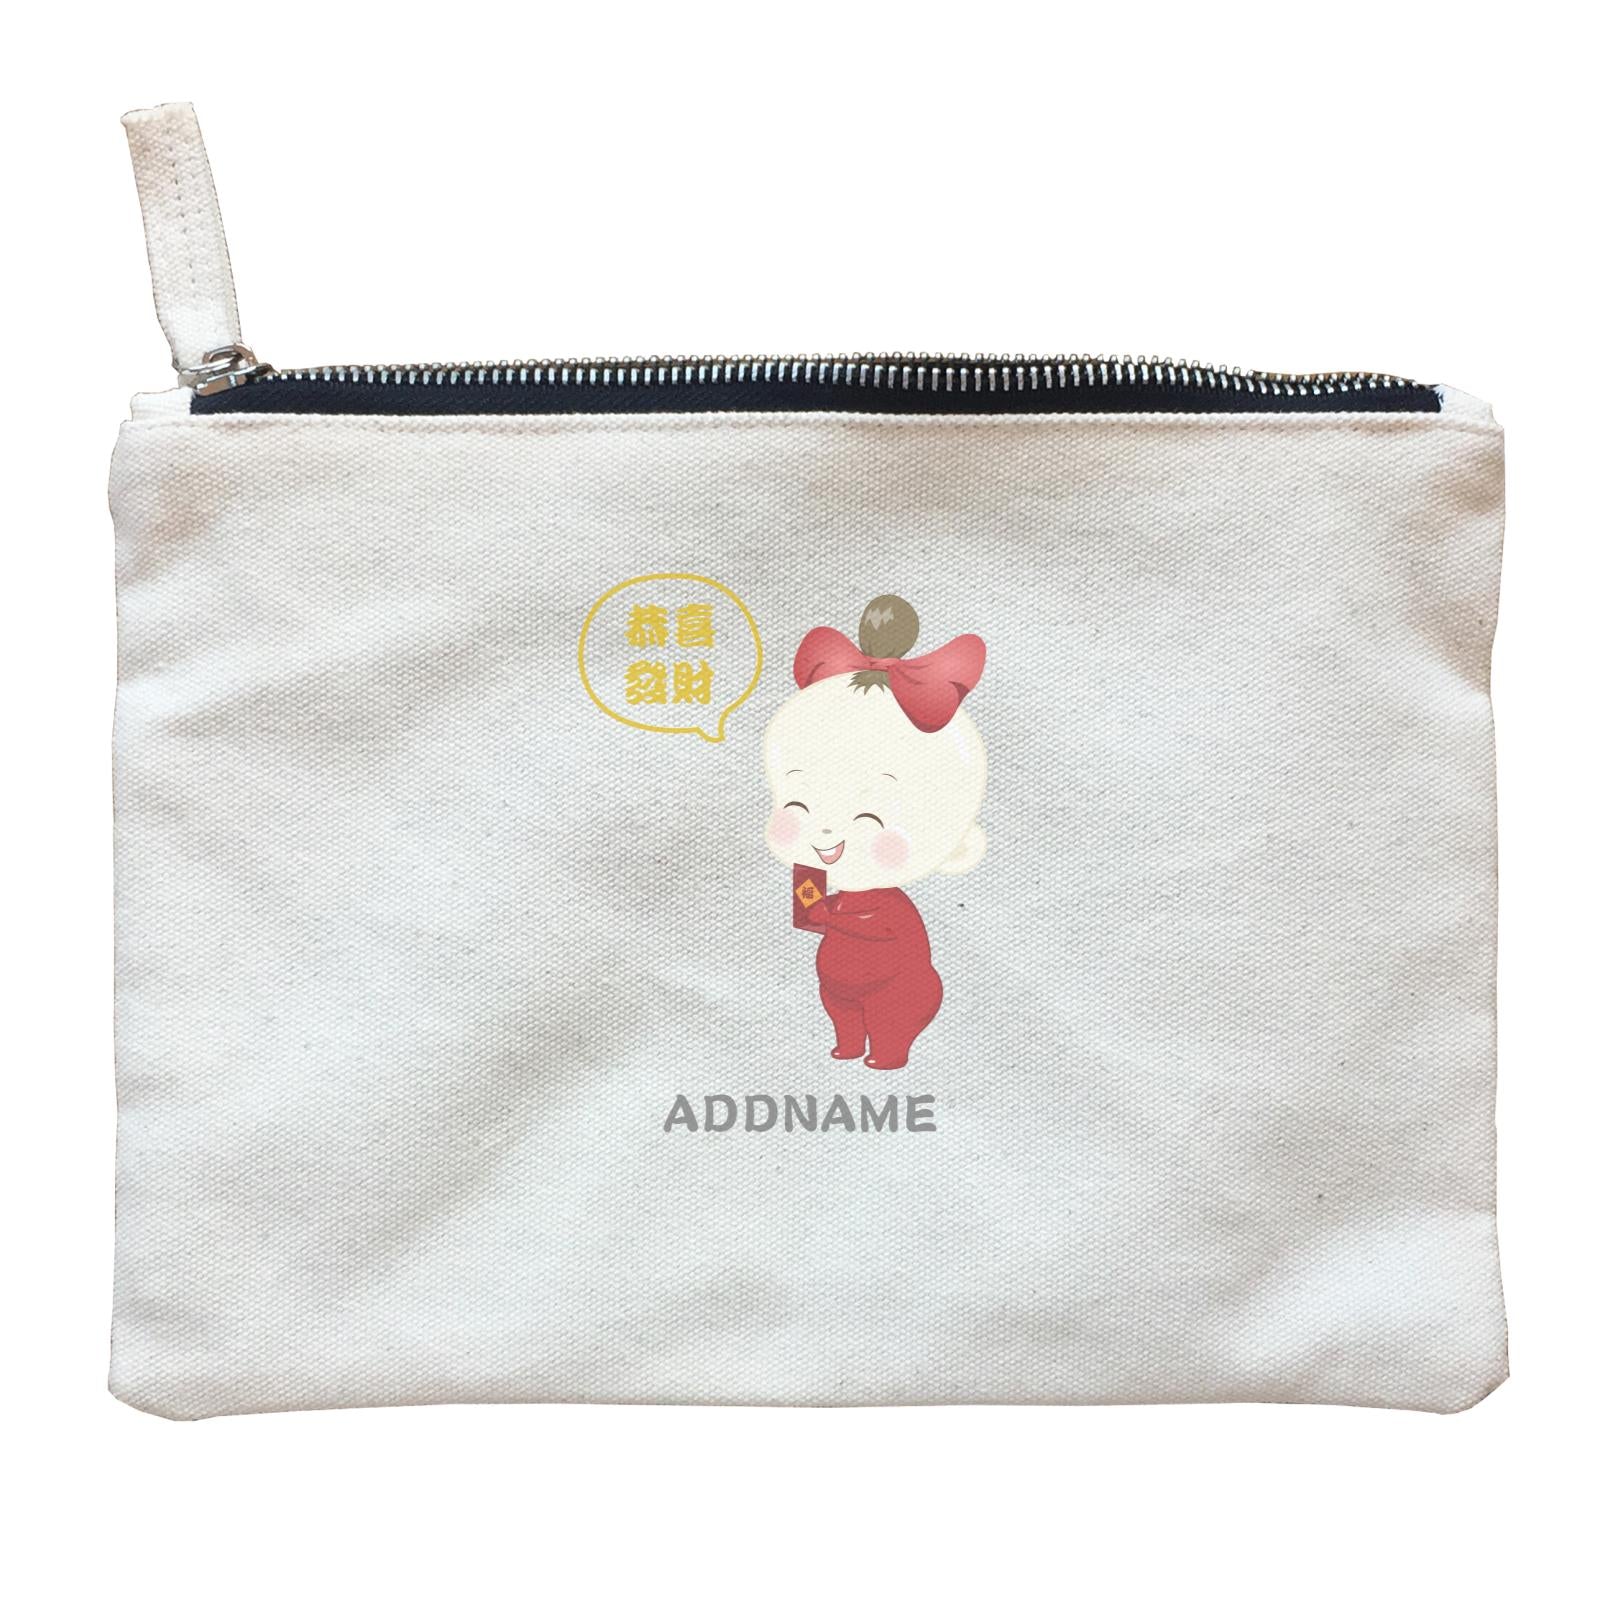 Chinese New Year Family Gong Xi Fai Cai Baby Girl Addname Zipper Pouch